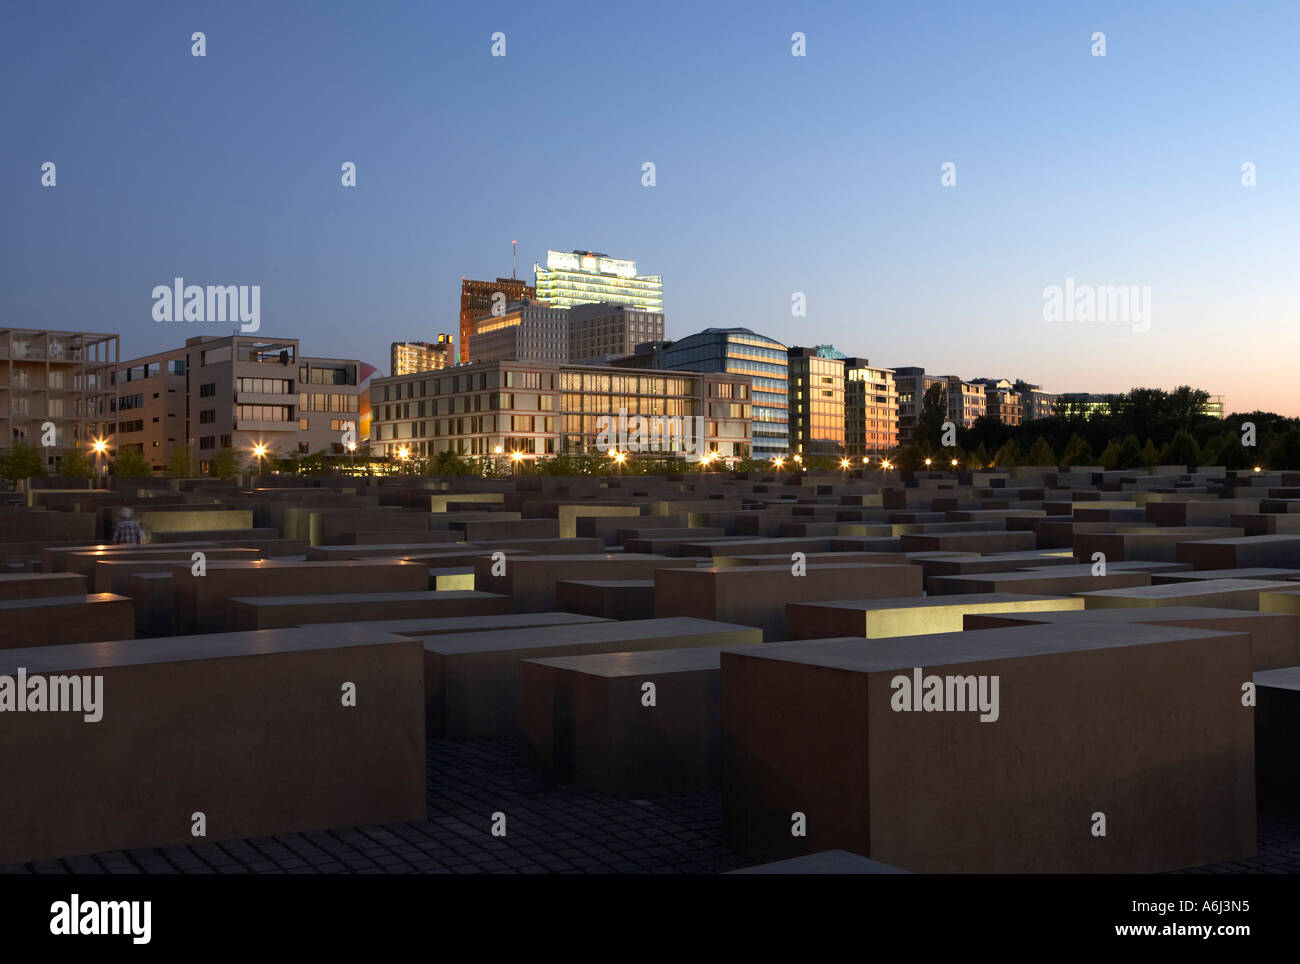 The lit Holocaust memorial at night with view of the multistoried buildings at the Potsdamer place, Berlin, Germany Stock Photo